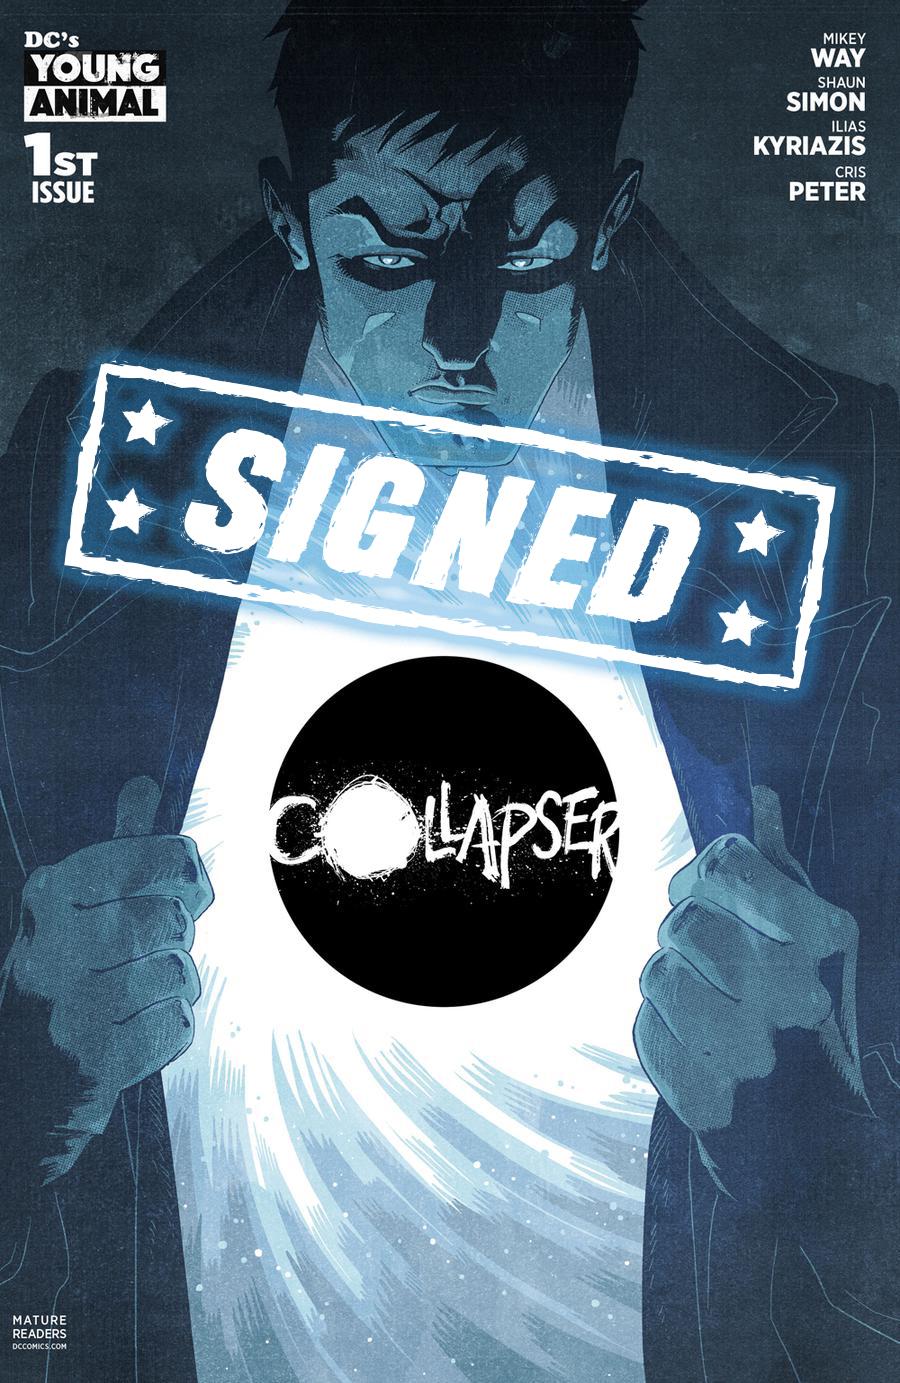 Collapser #1 Cover C Regular Ilias Kyriazis Cover Signed By Mikey Way & Shaun Simon